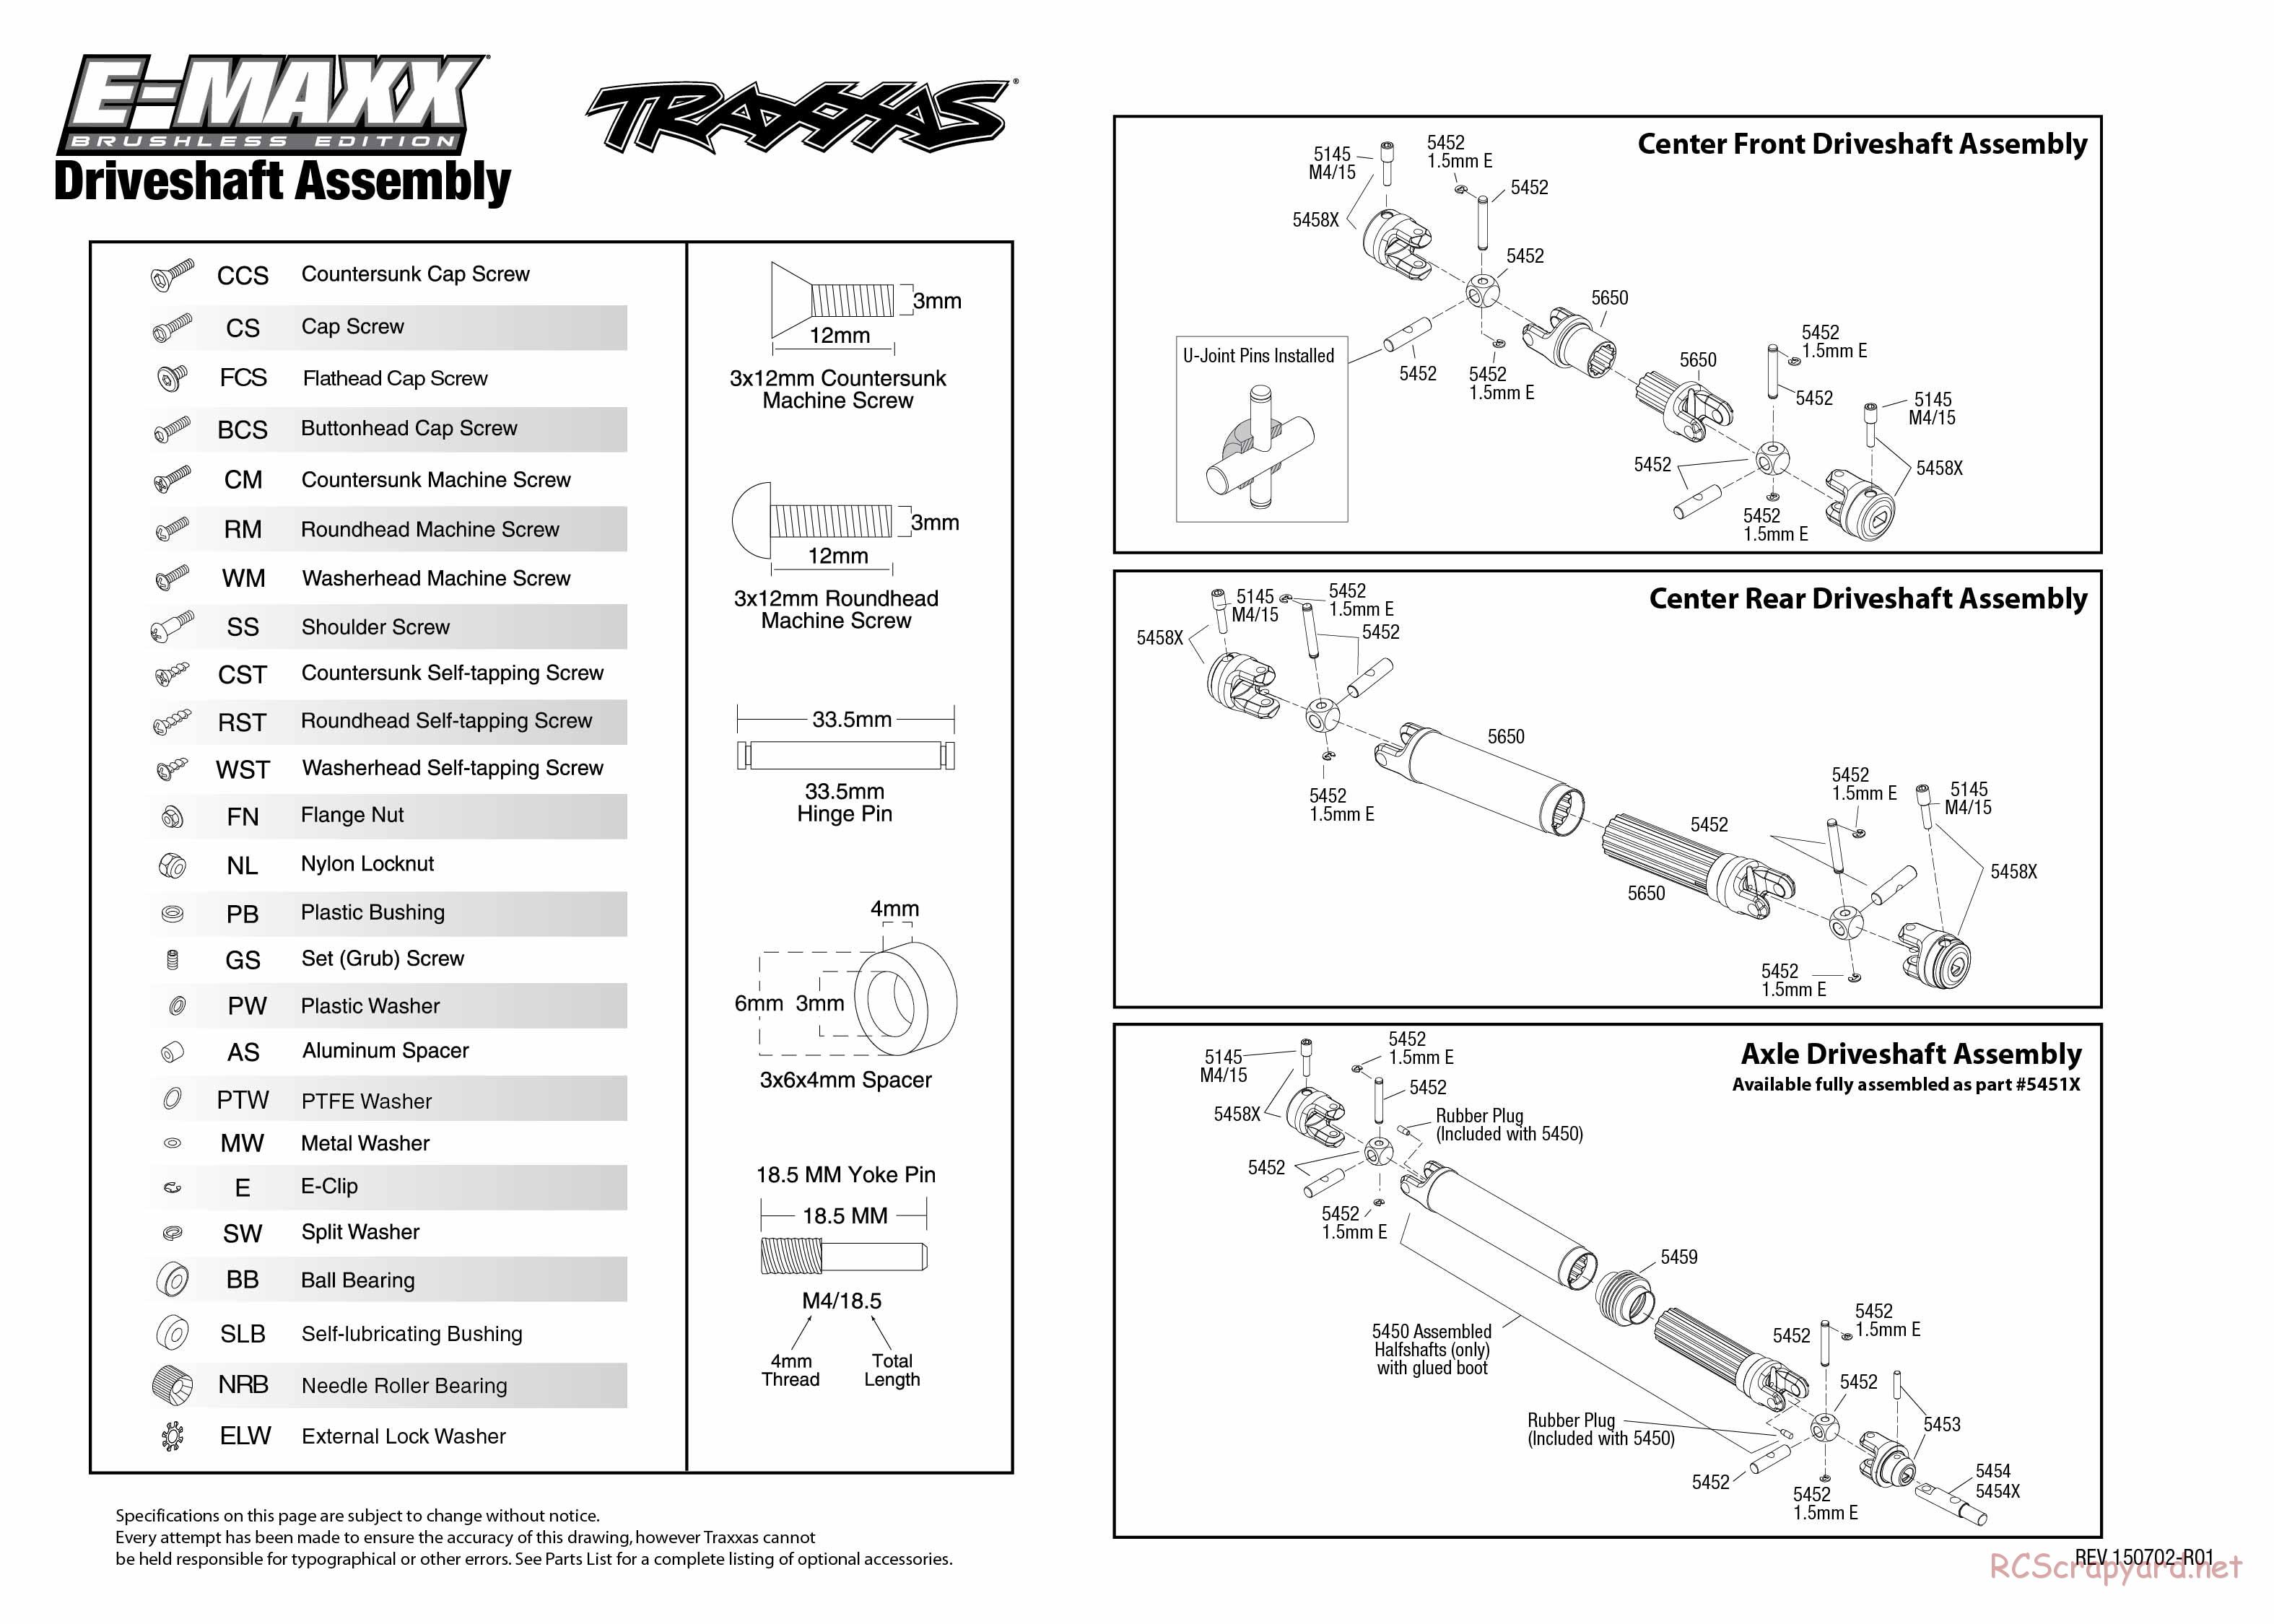 Traxxas - E-Maxx Brushless (2015) - Exploded Views - Page 5